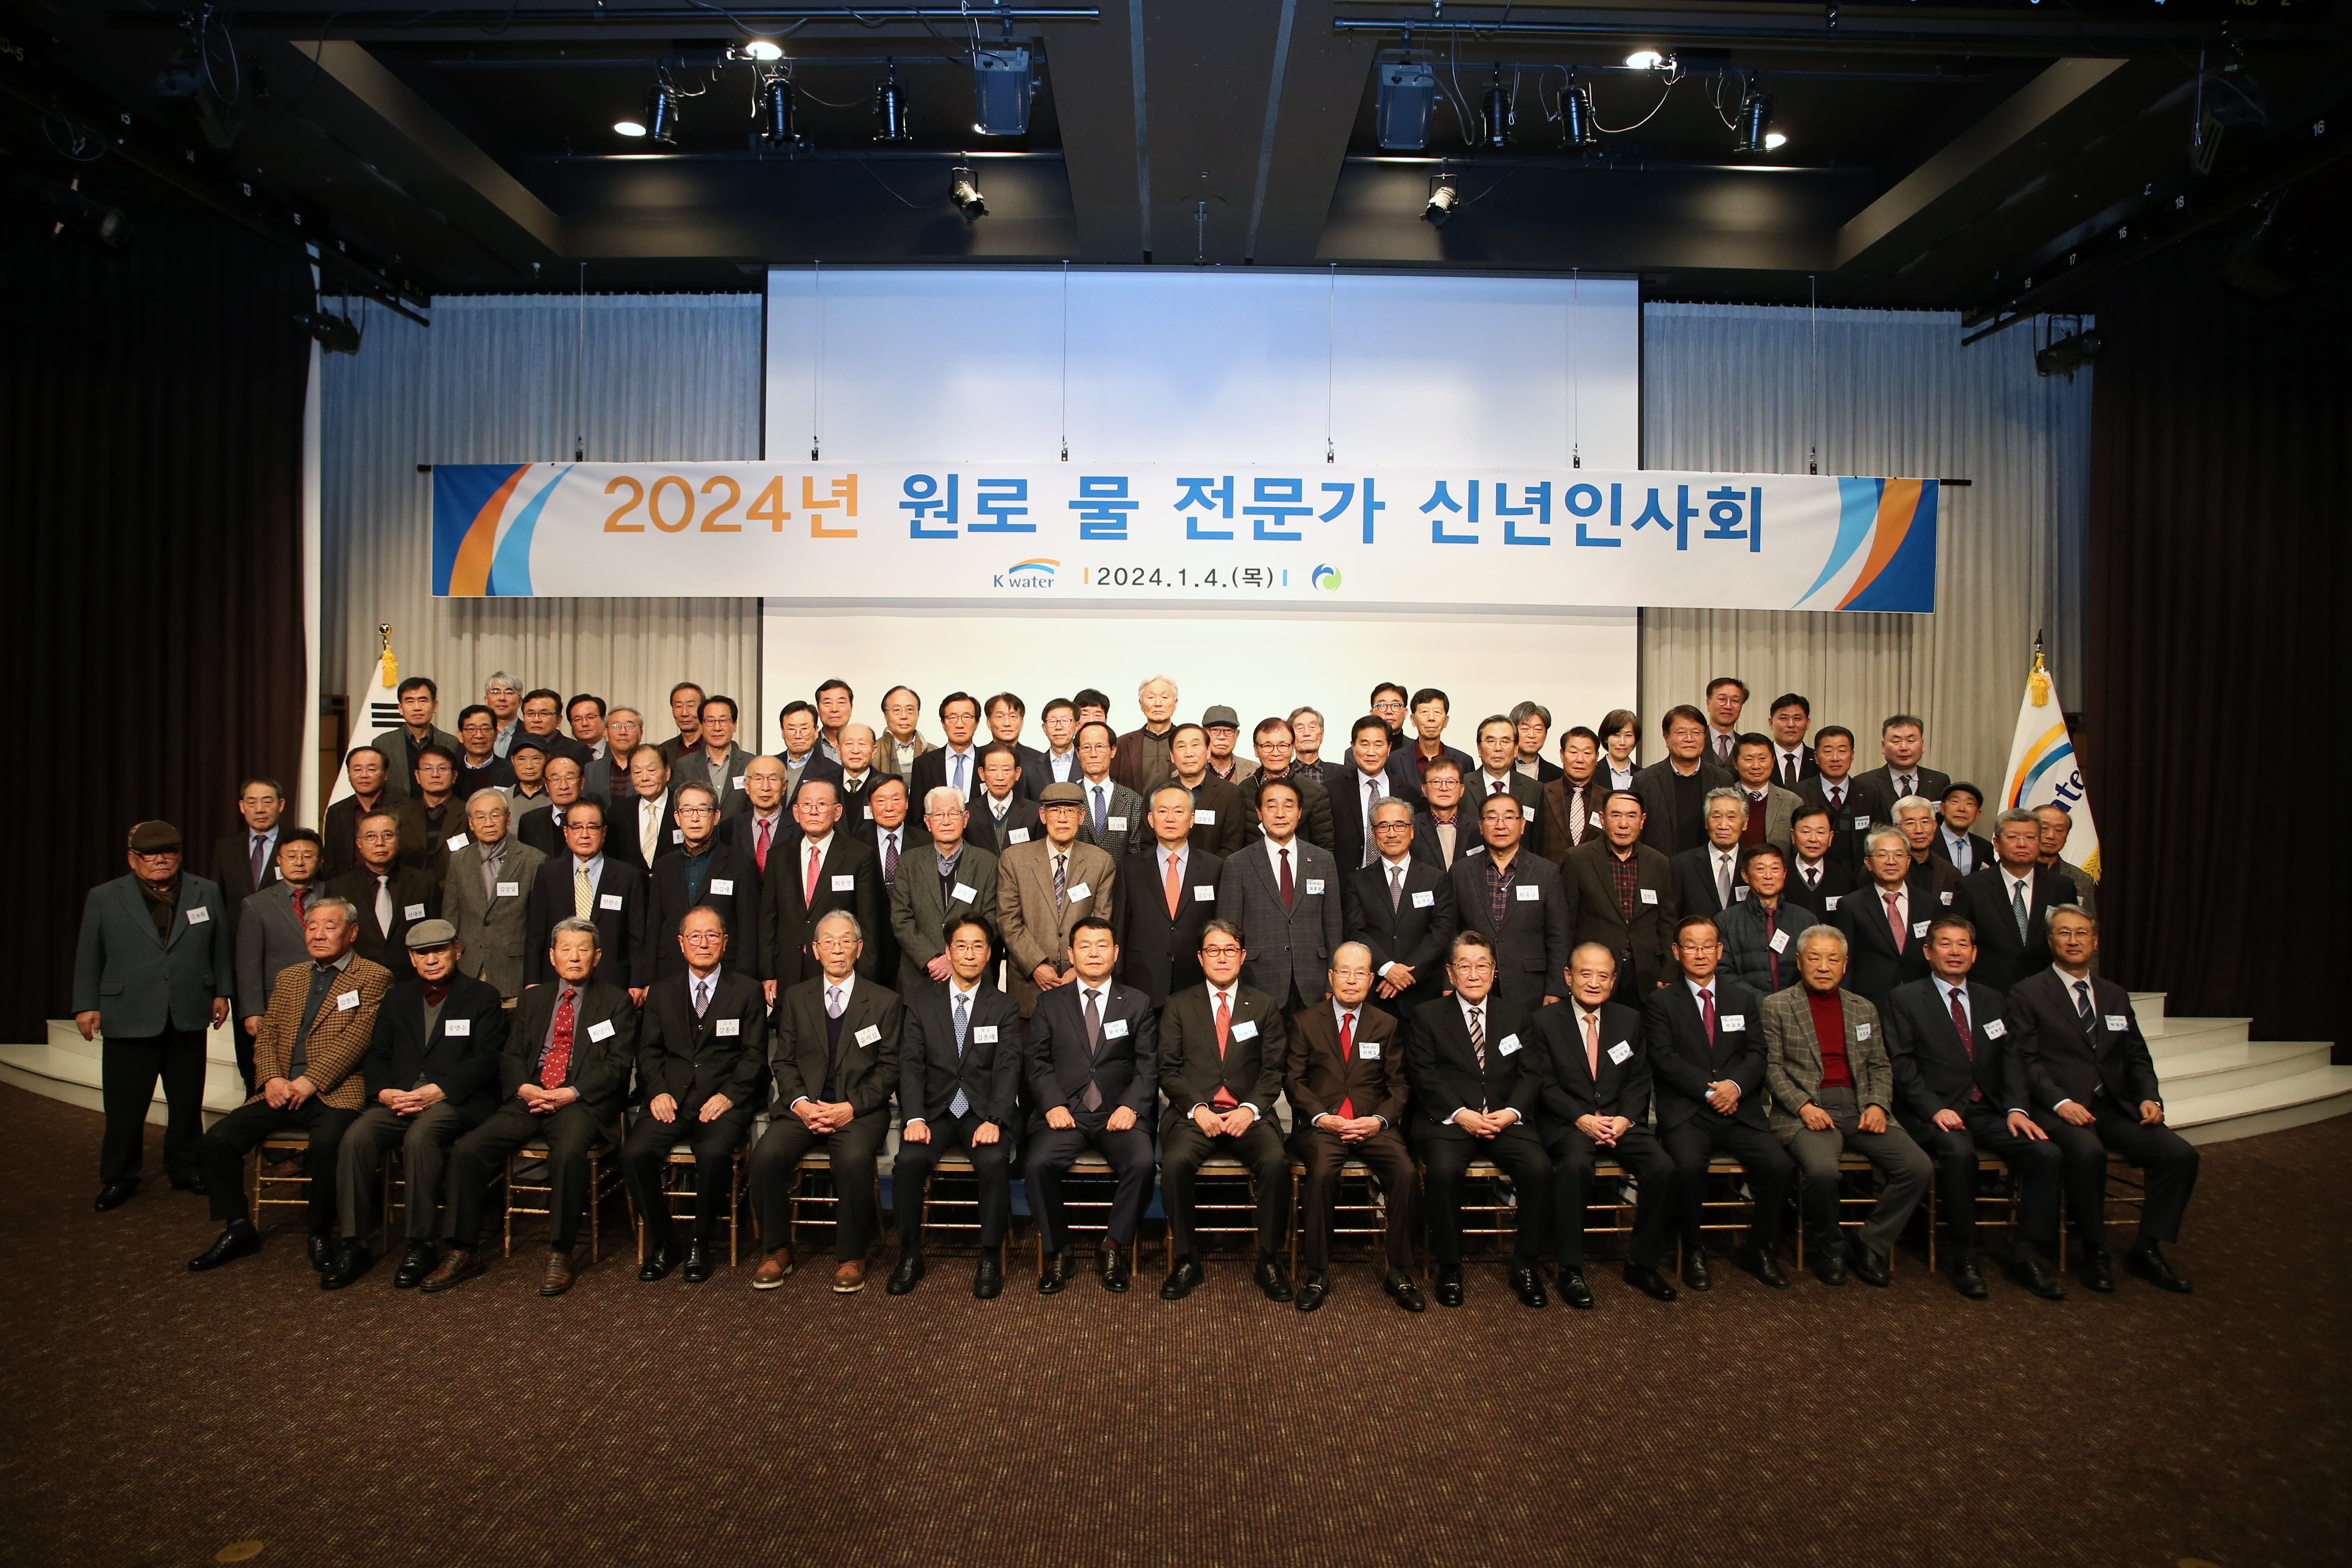 New Year's Greeting Ceremony for Senior Water Experts